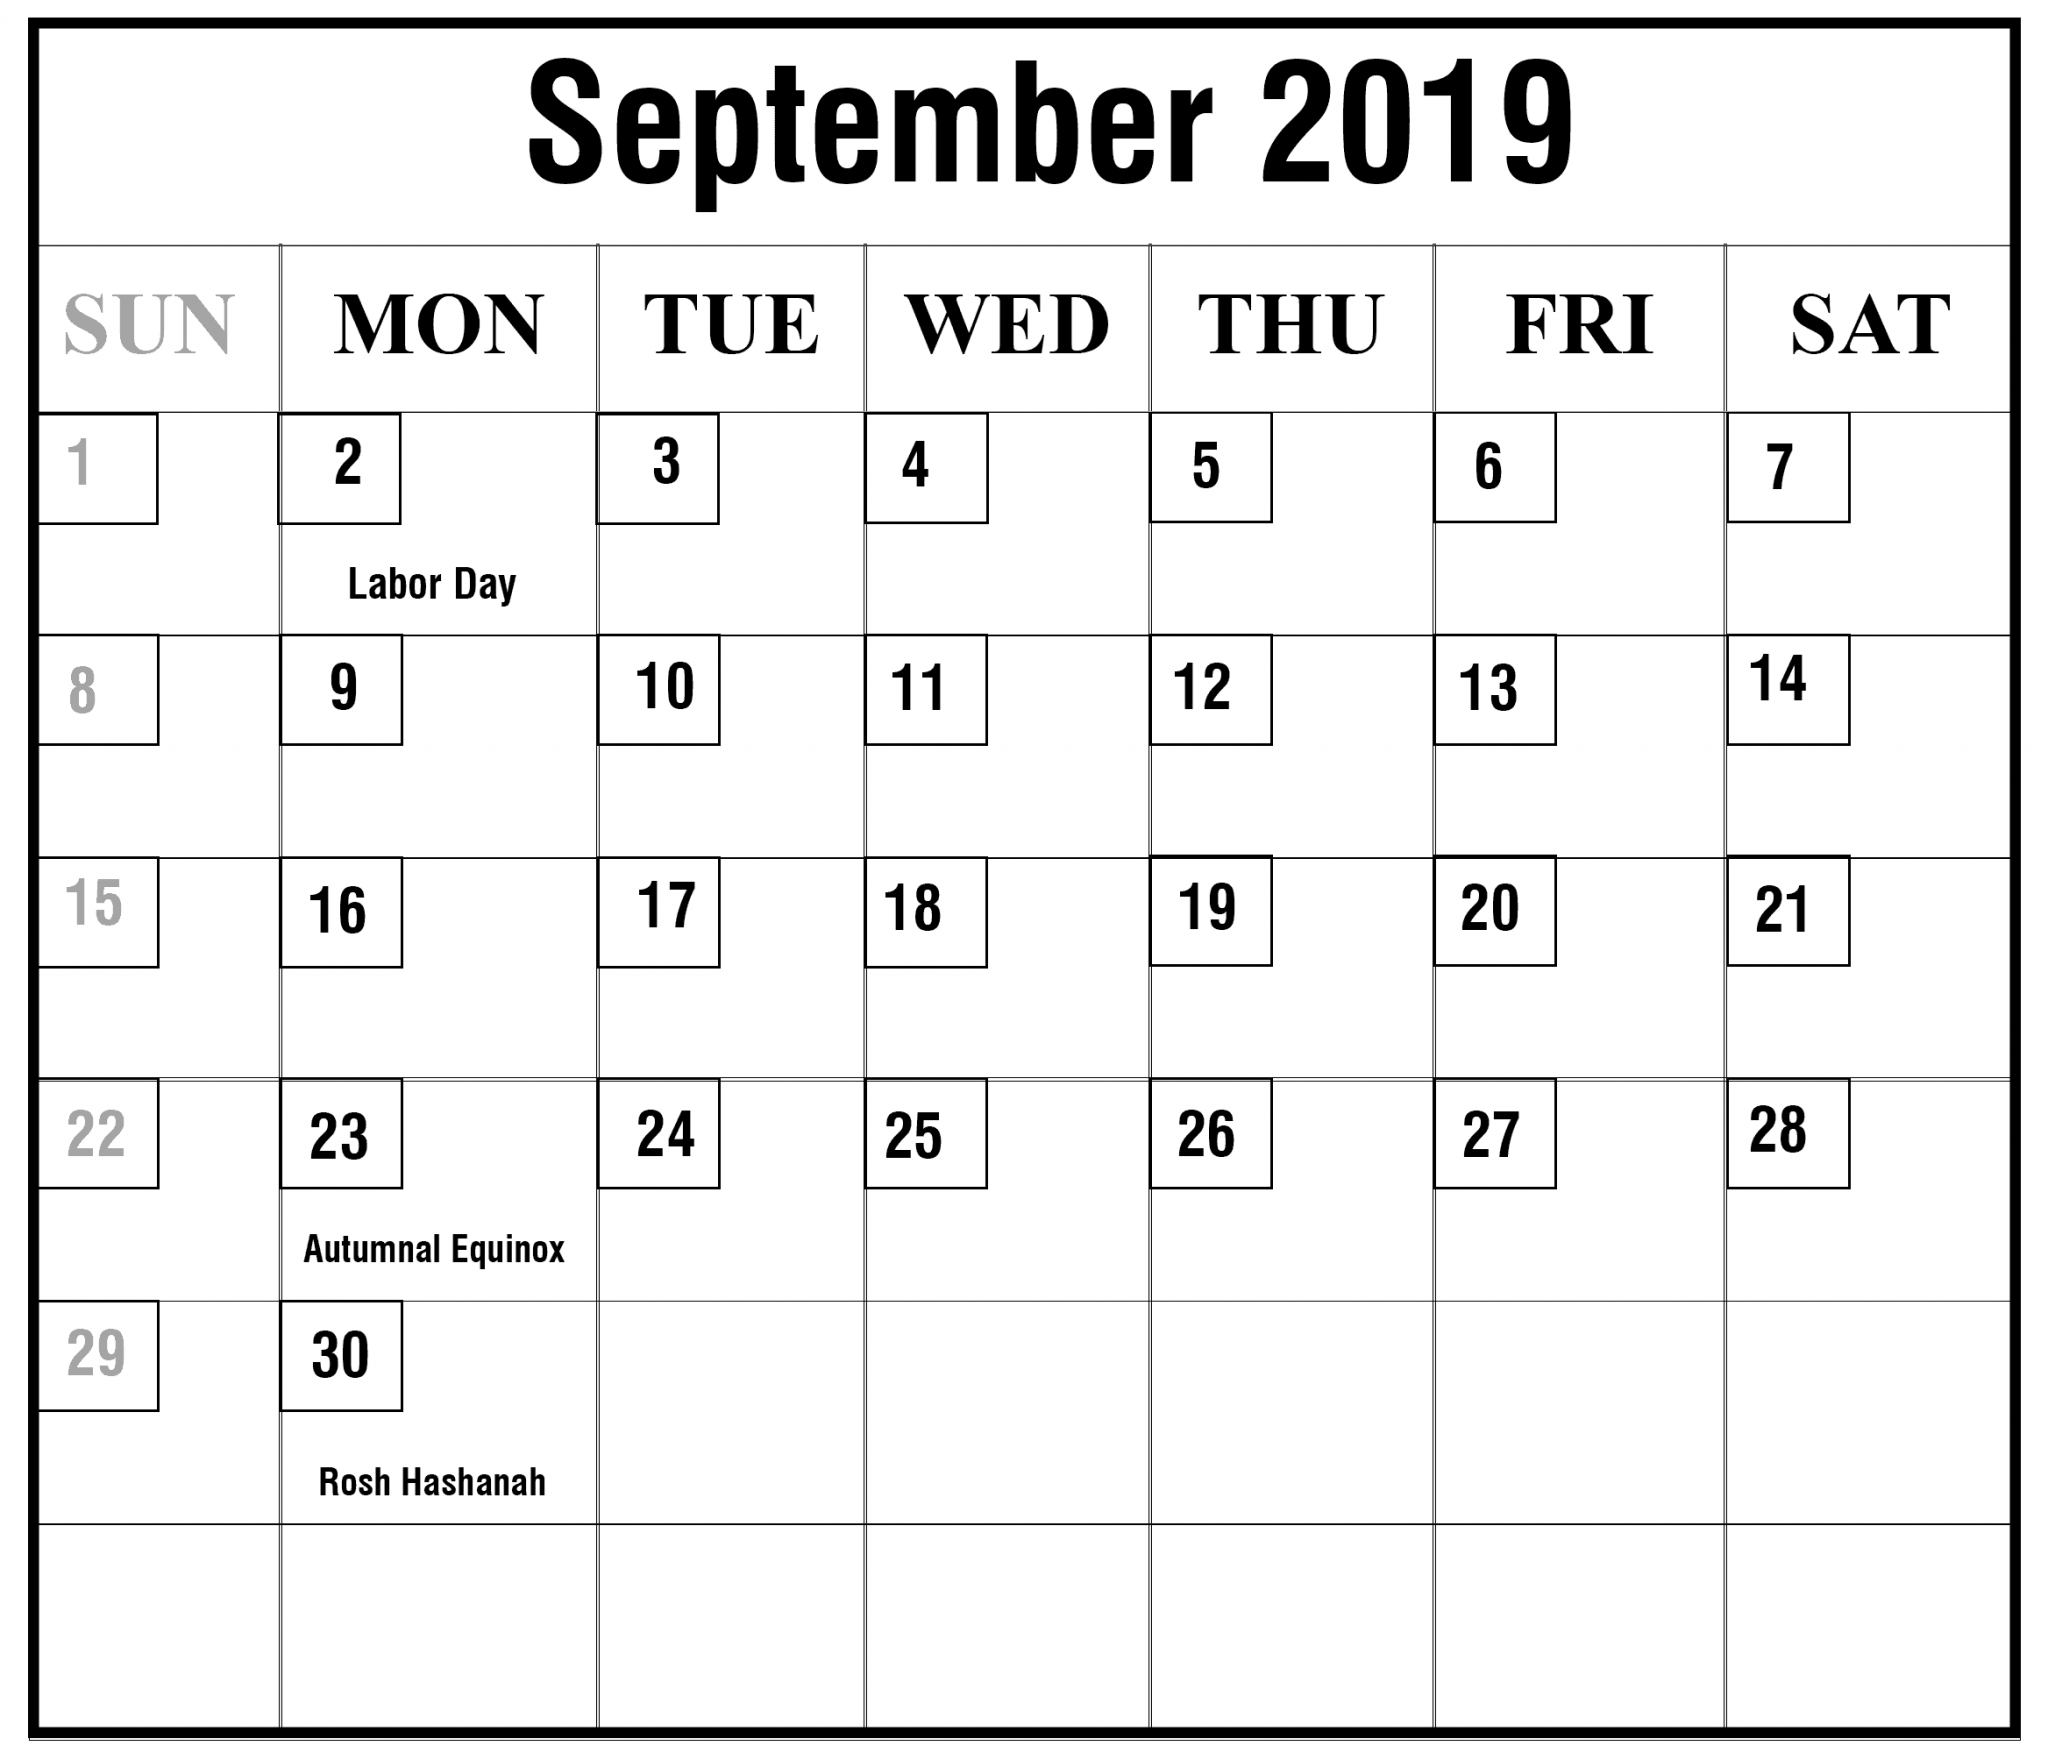 How To Schedule Your Month With September 2019 Printable Calendar